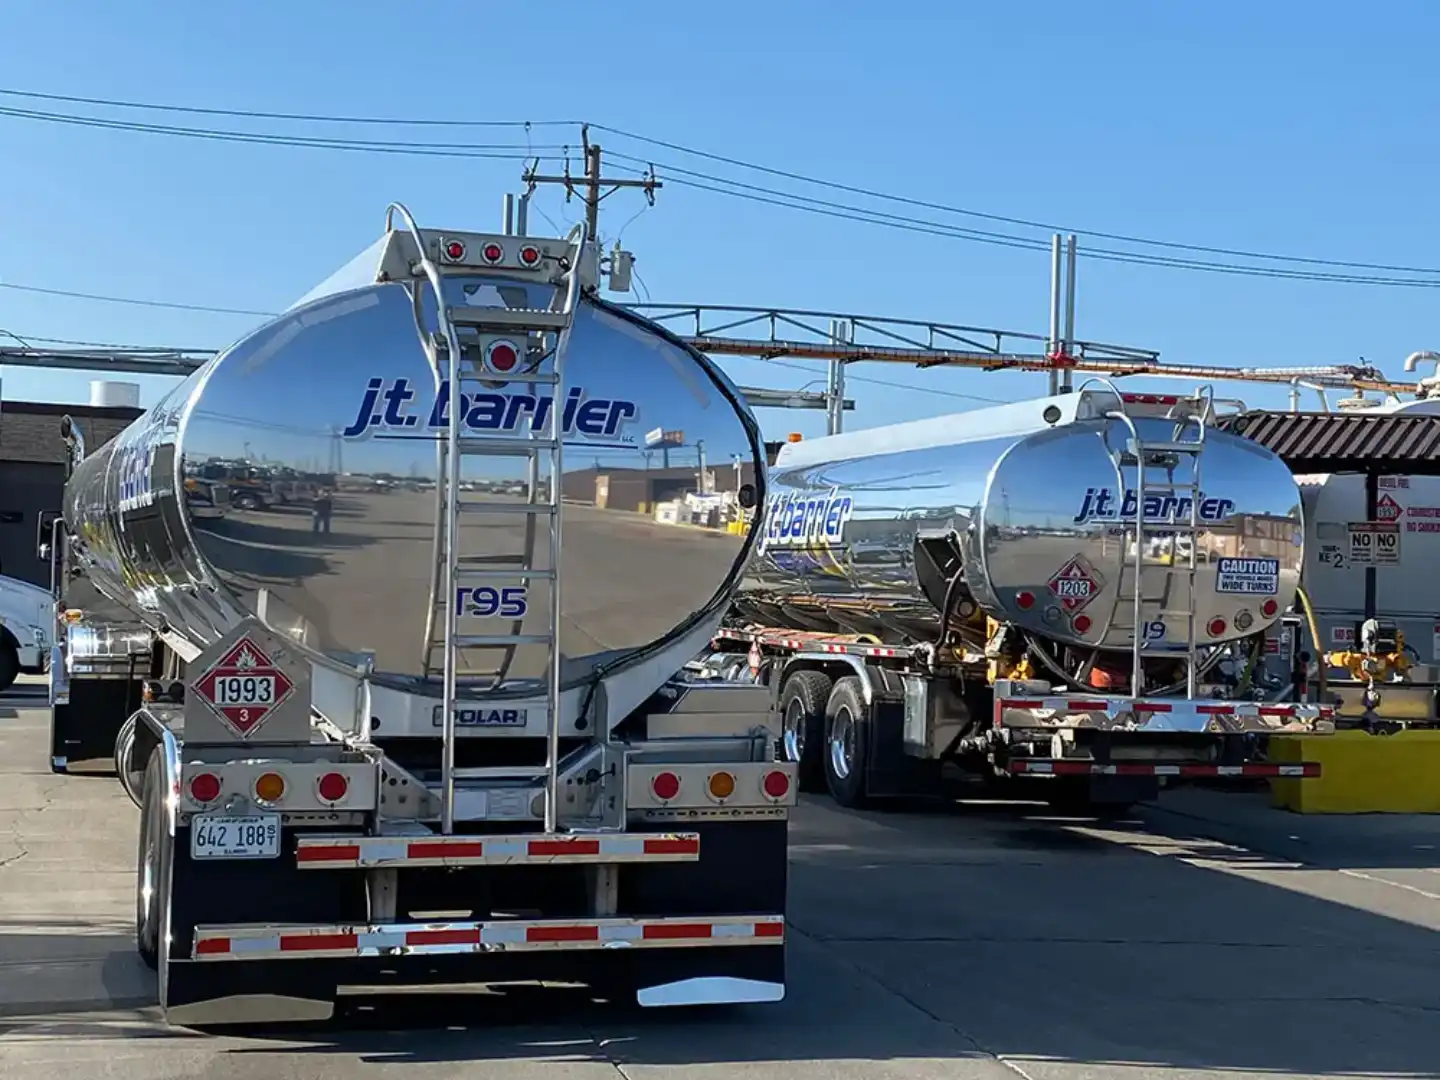 Two silver tank trucks parked in front of a building.